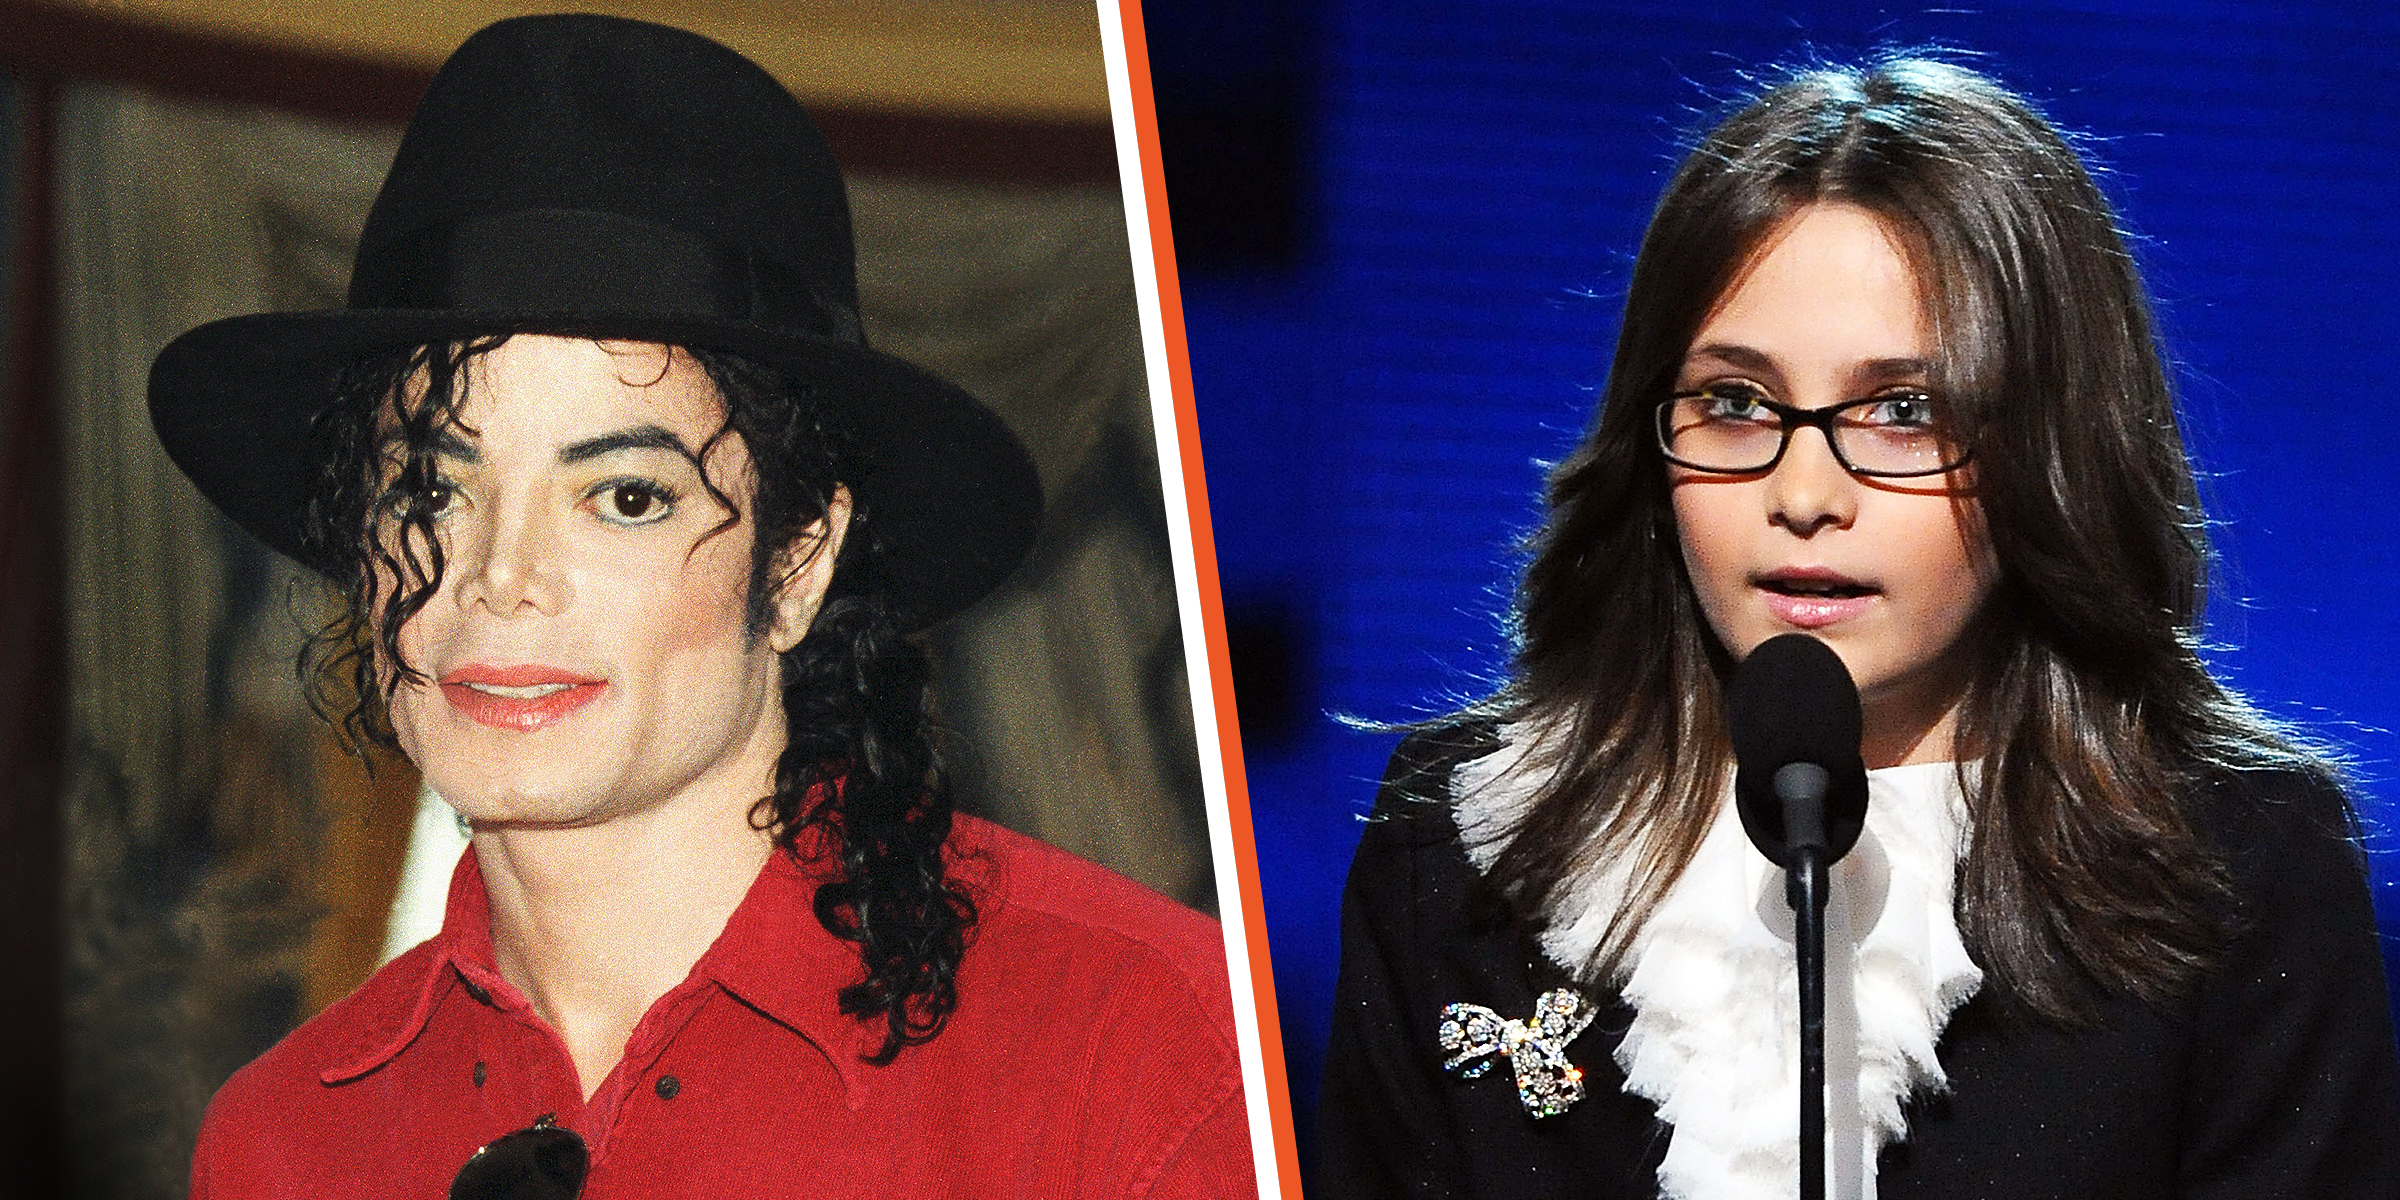 ‘Michael Girl Version’: Paris Jackson’s Fans Notice Her Incredible Resemblance to Her Dad in Recent Video